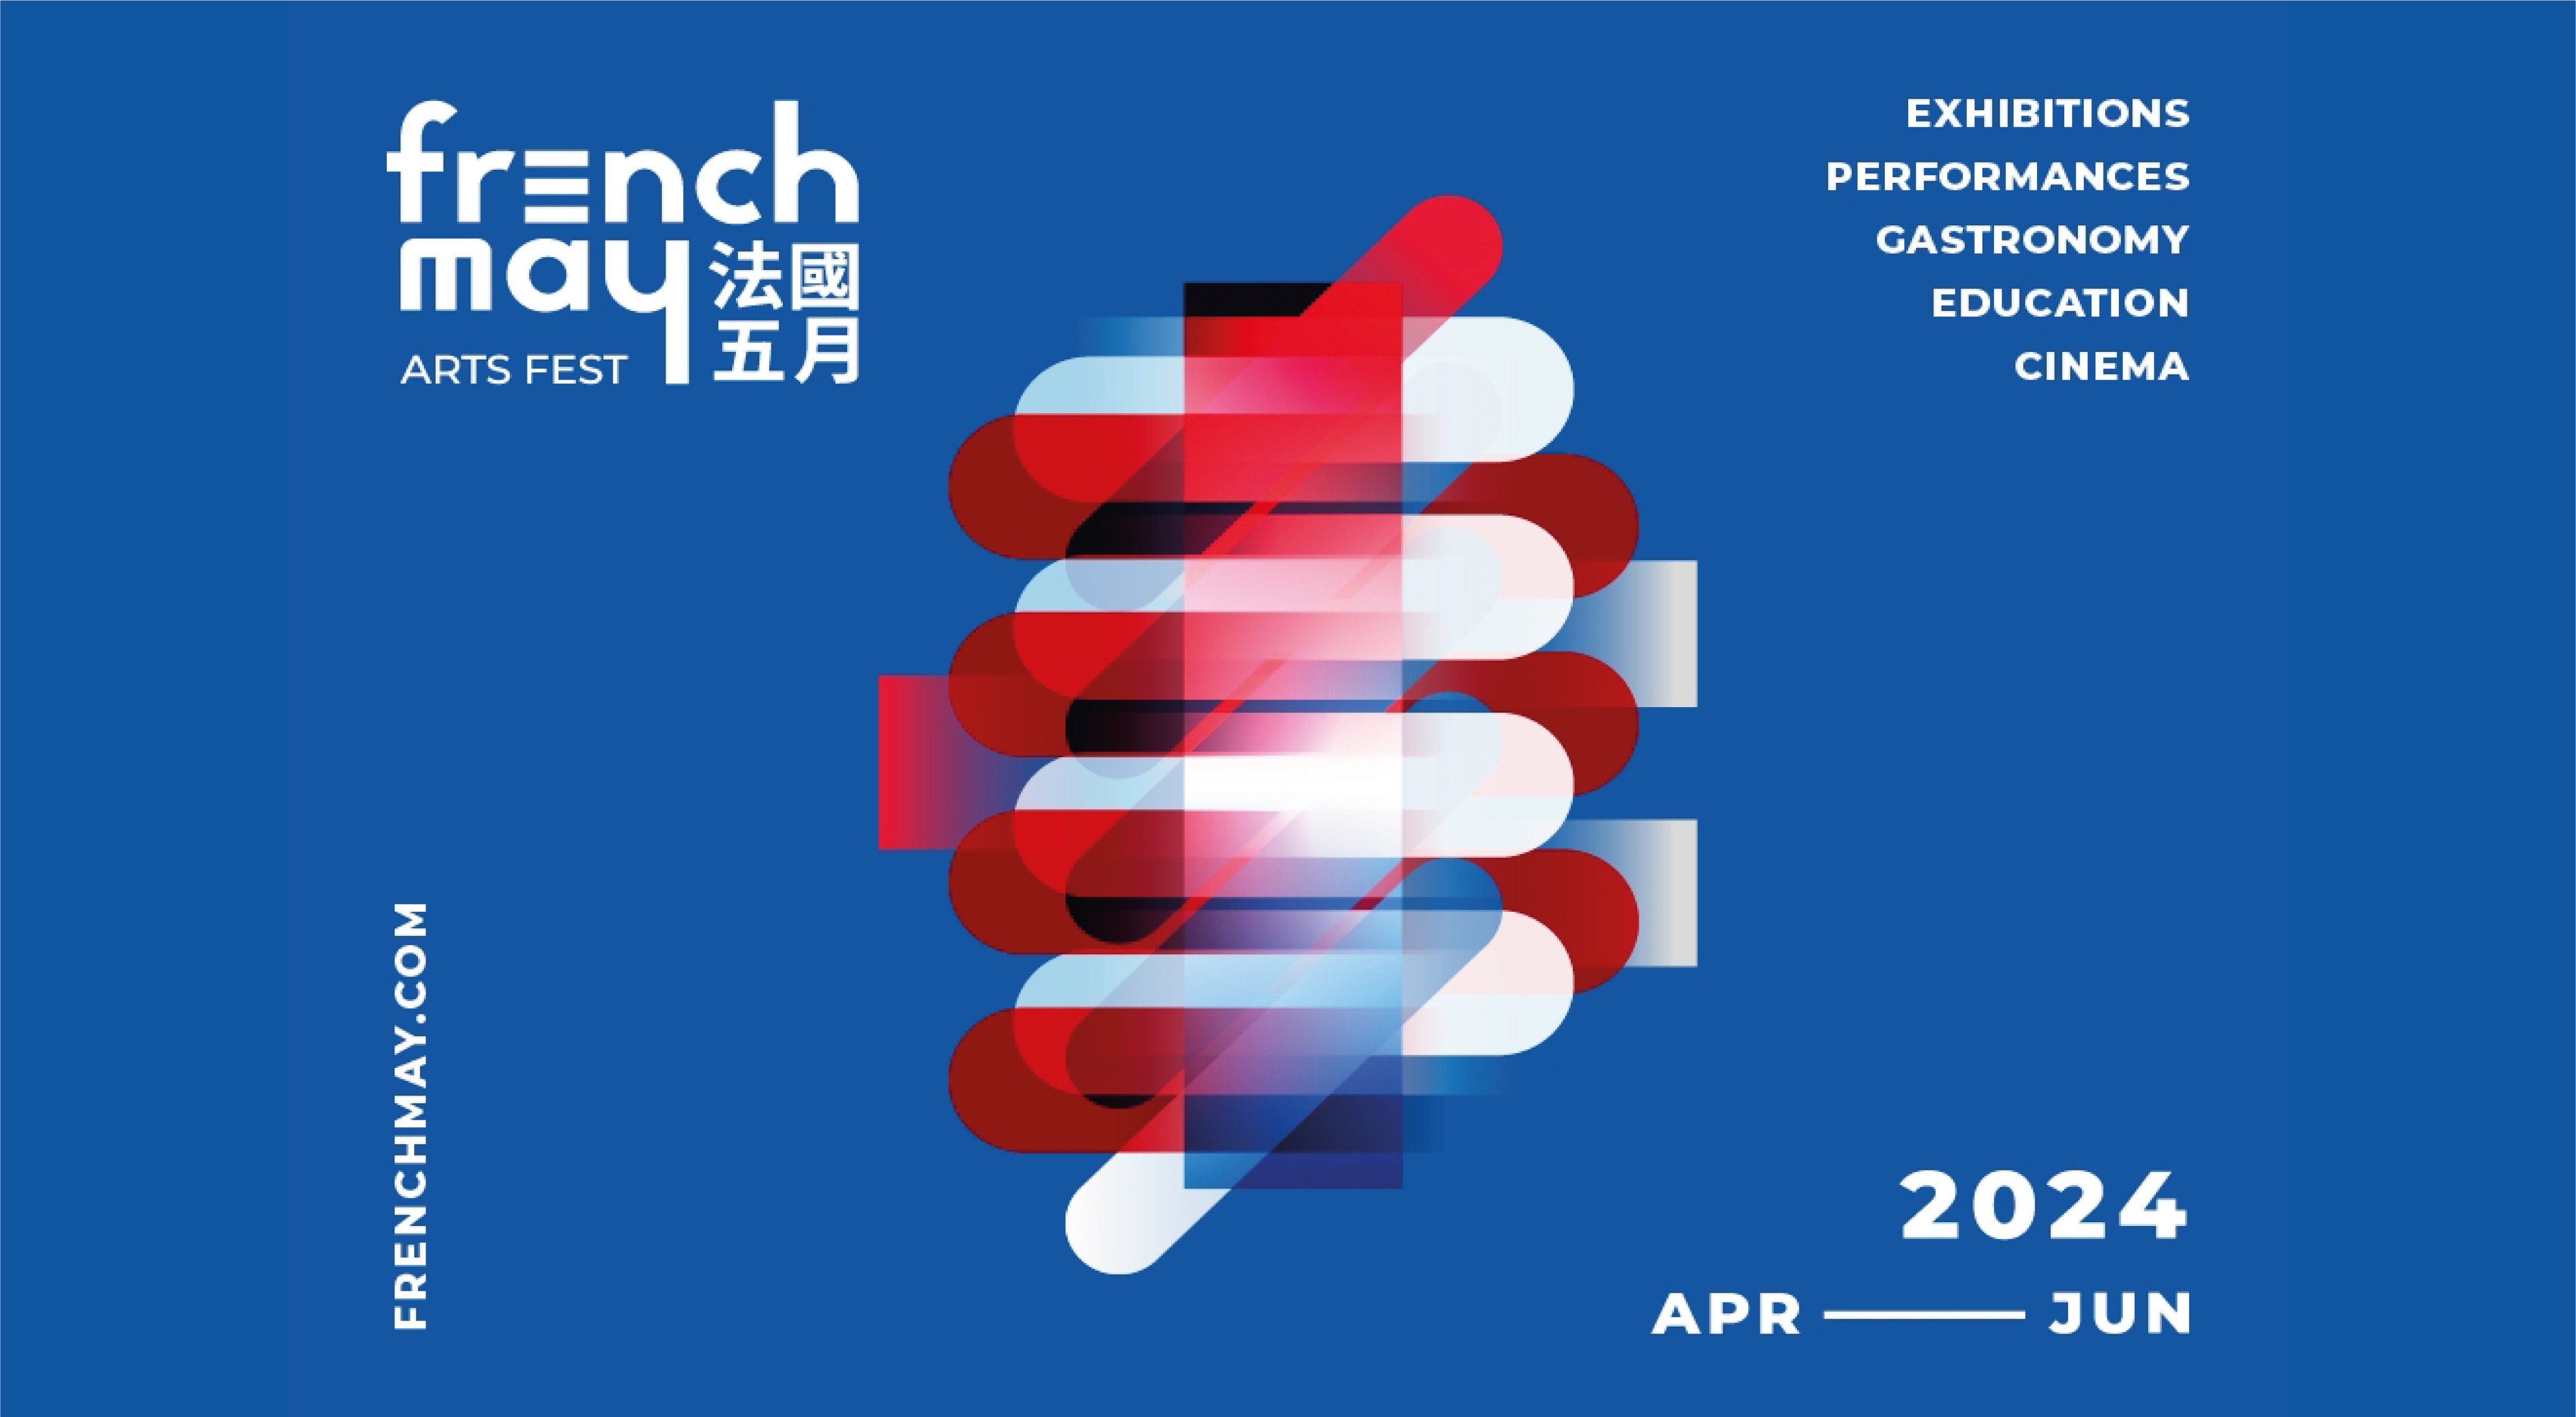 French May Cinema Programme in Macao